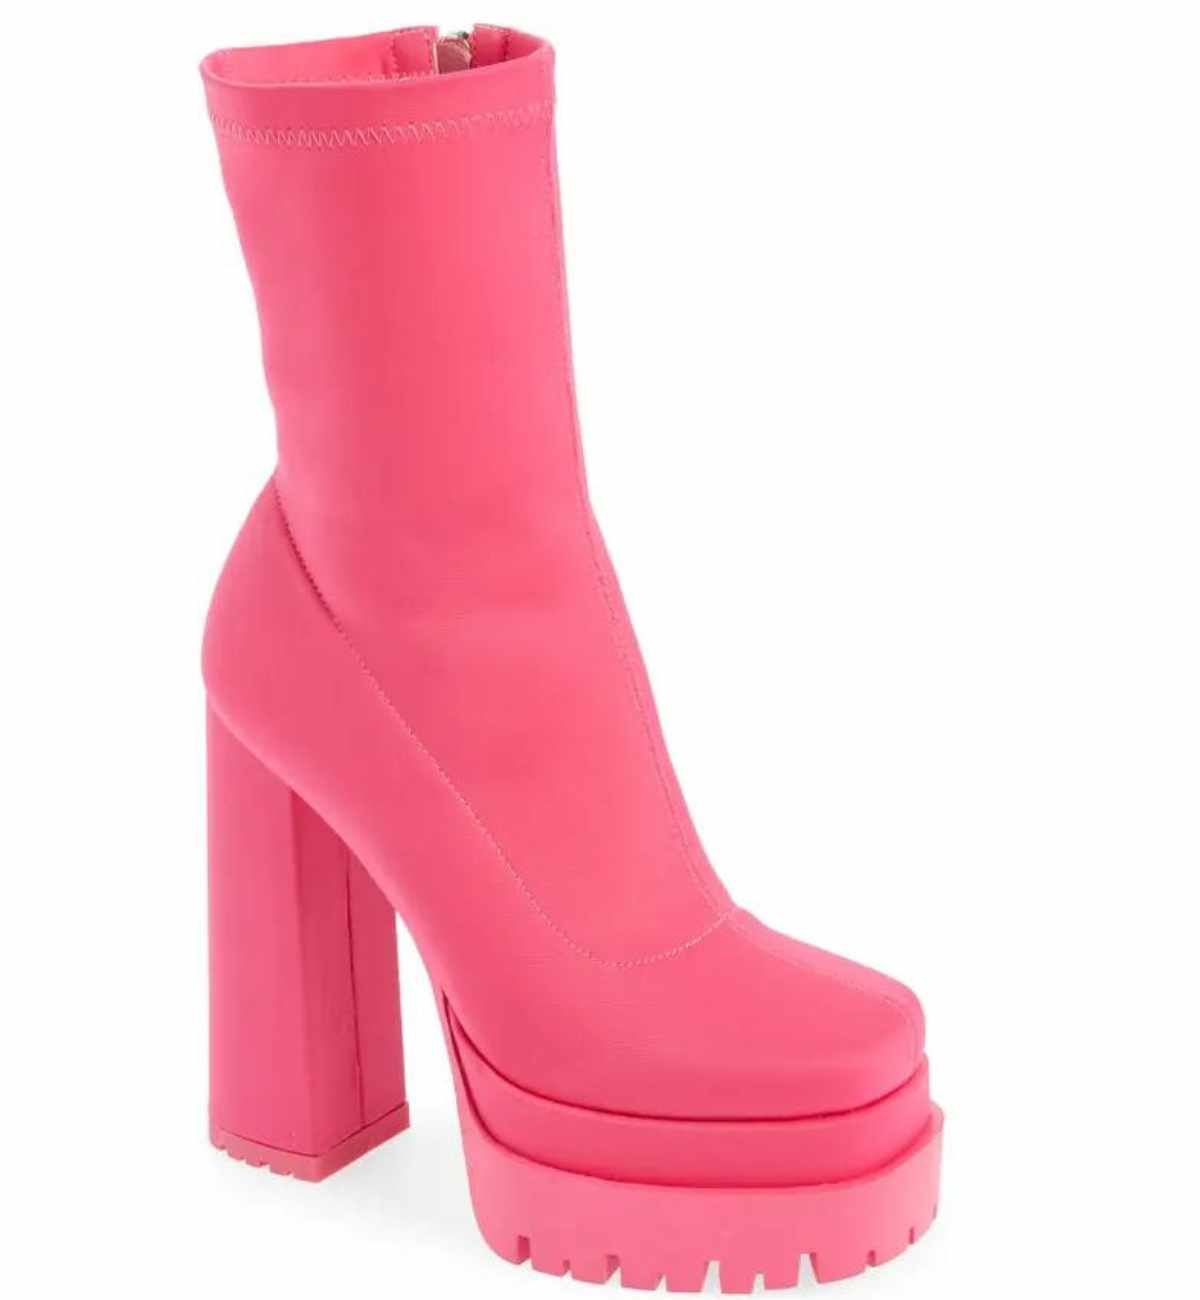 Hot Pink Barbie Core Fashion Platform Sock Bootie with tread sole on white background.